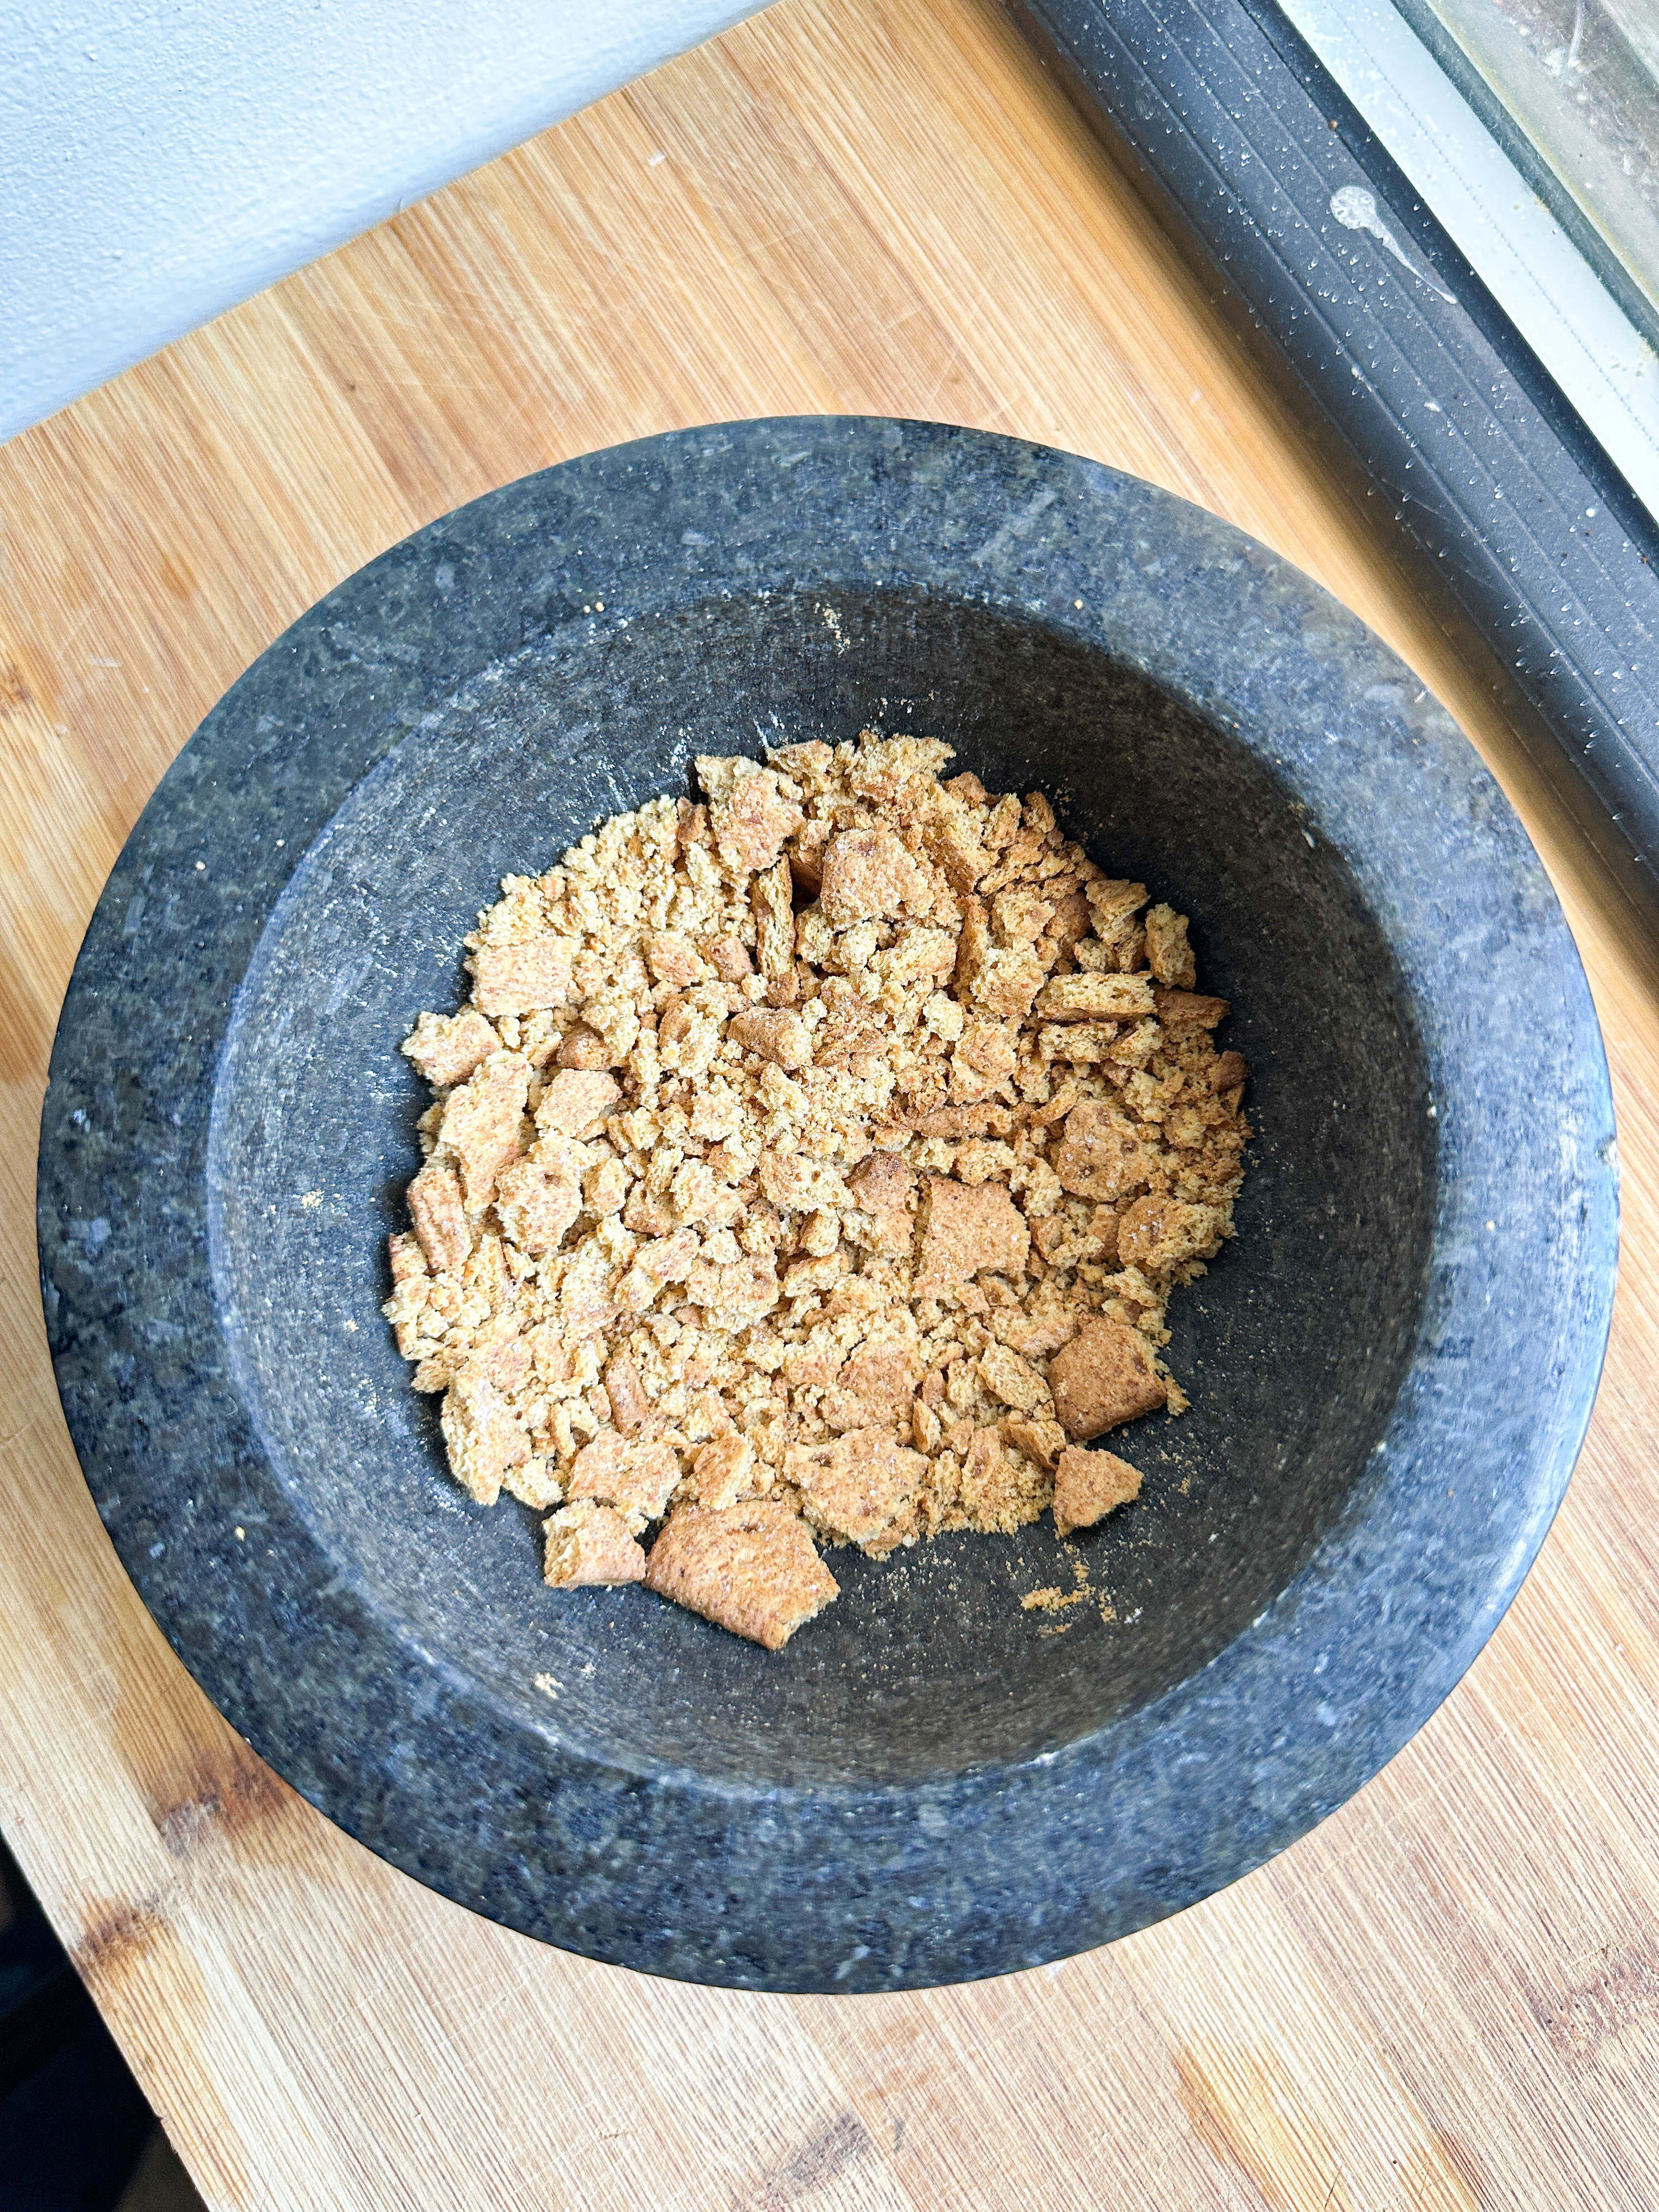 graham cracker pieces broken up in a mortal and pestle